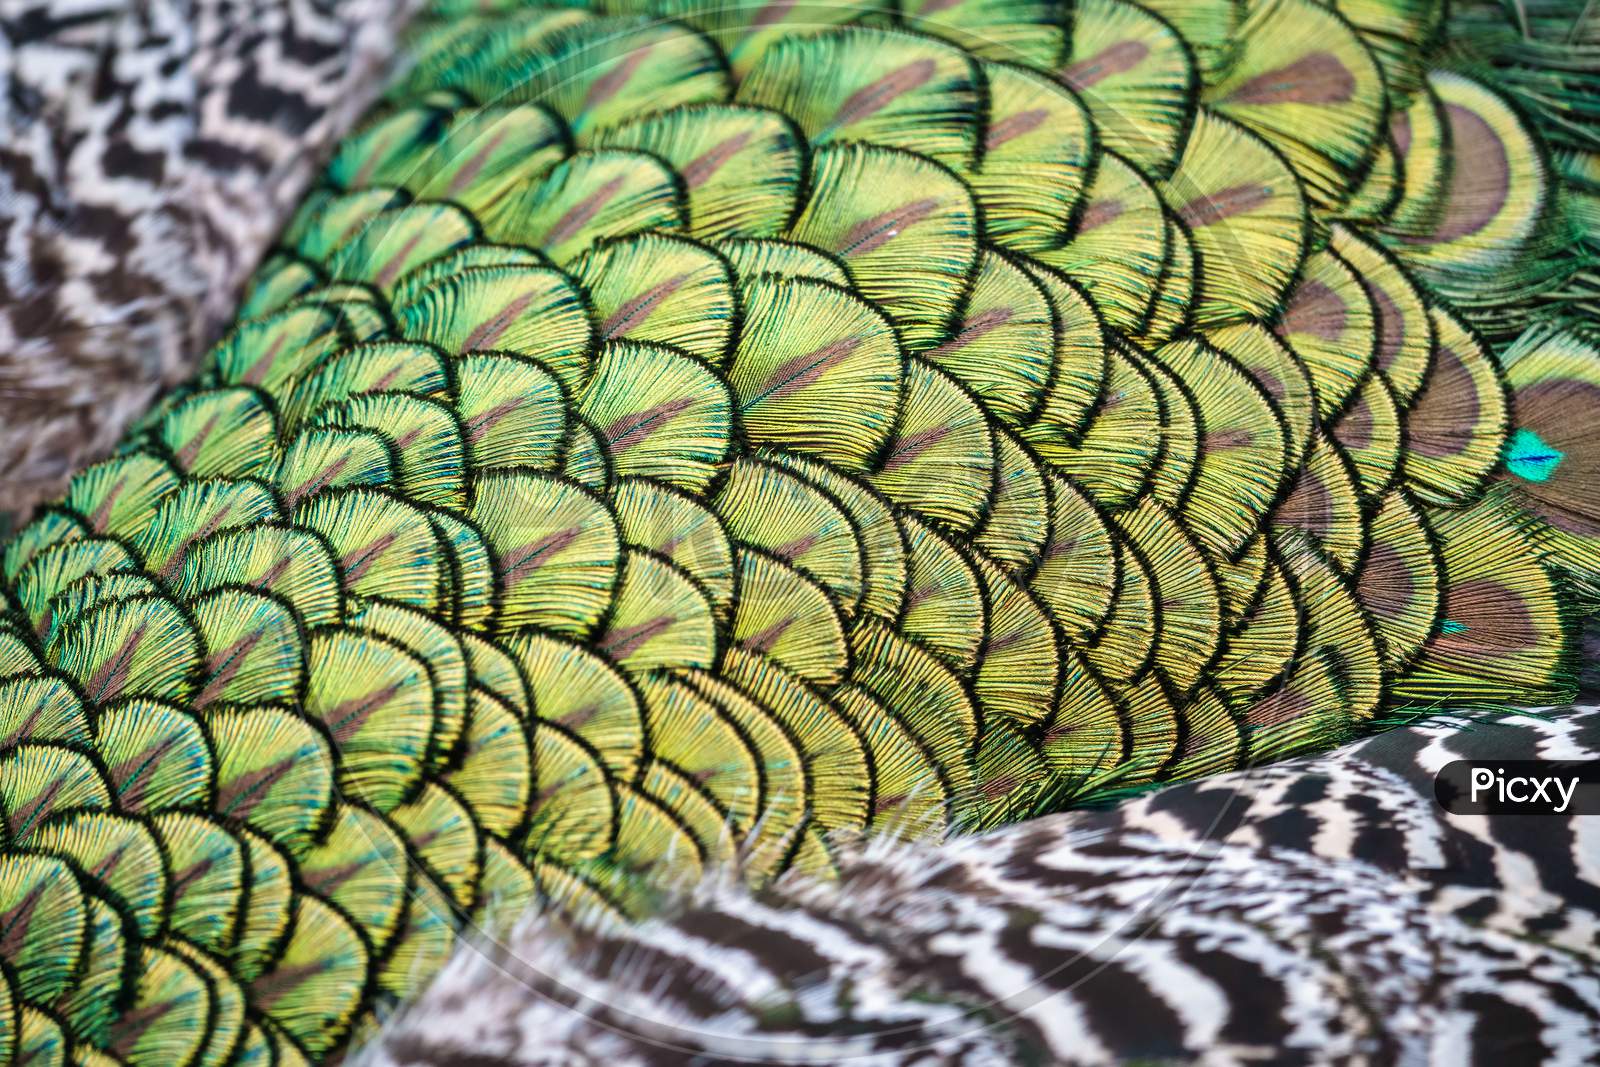 Close Up Of The Colourful Plumage Of A Peacock (Pavo Cristatus)